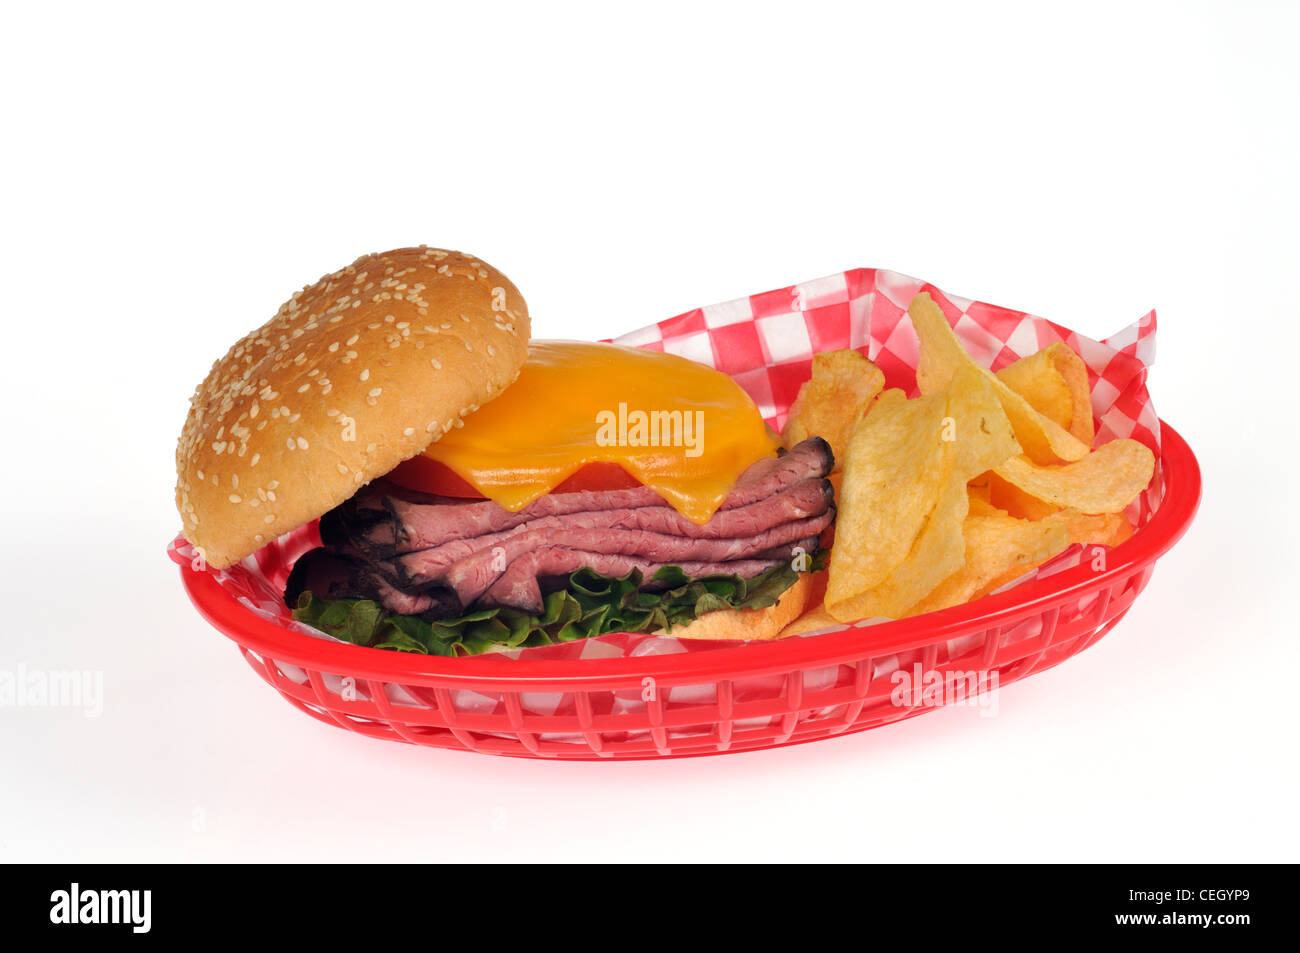 Sandwich with roast beef, lettuce, tomato salad and melted cheese on sesame seed bread roll in red retro basket with potato chips or crisps on white Stock Photo